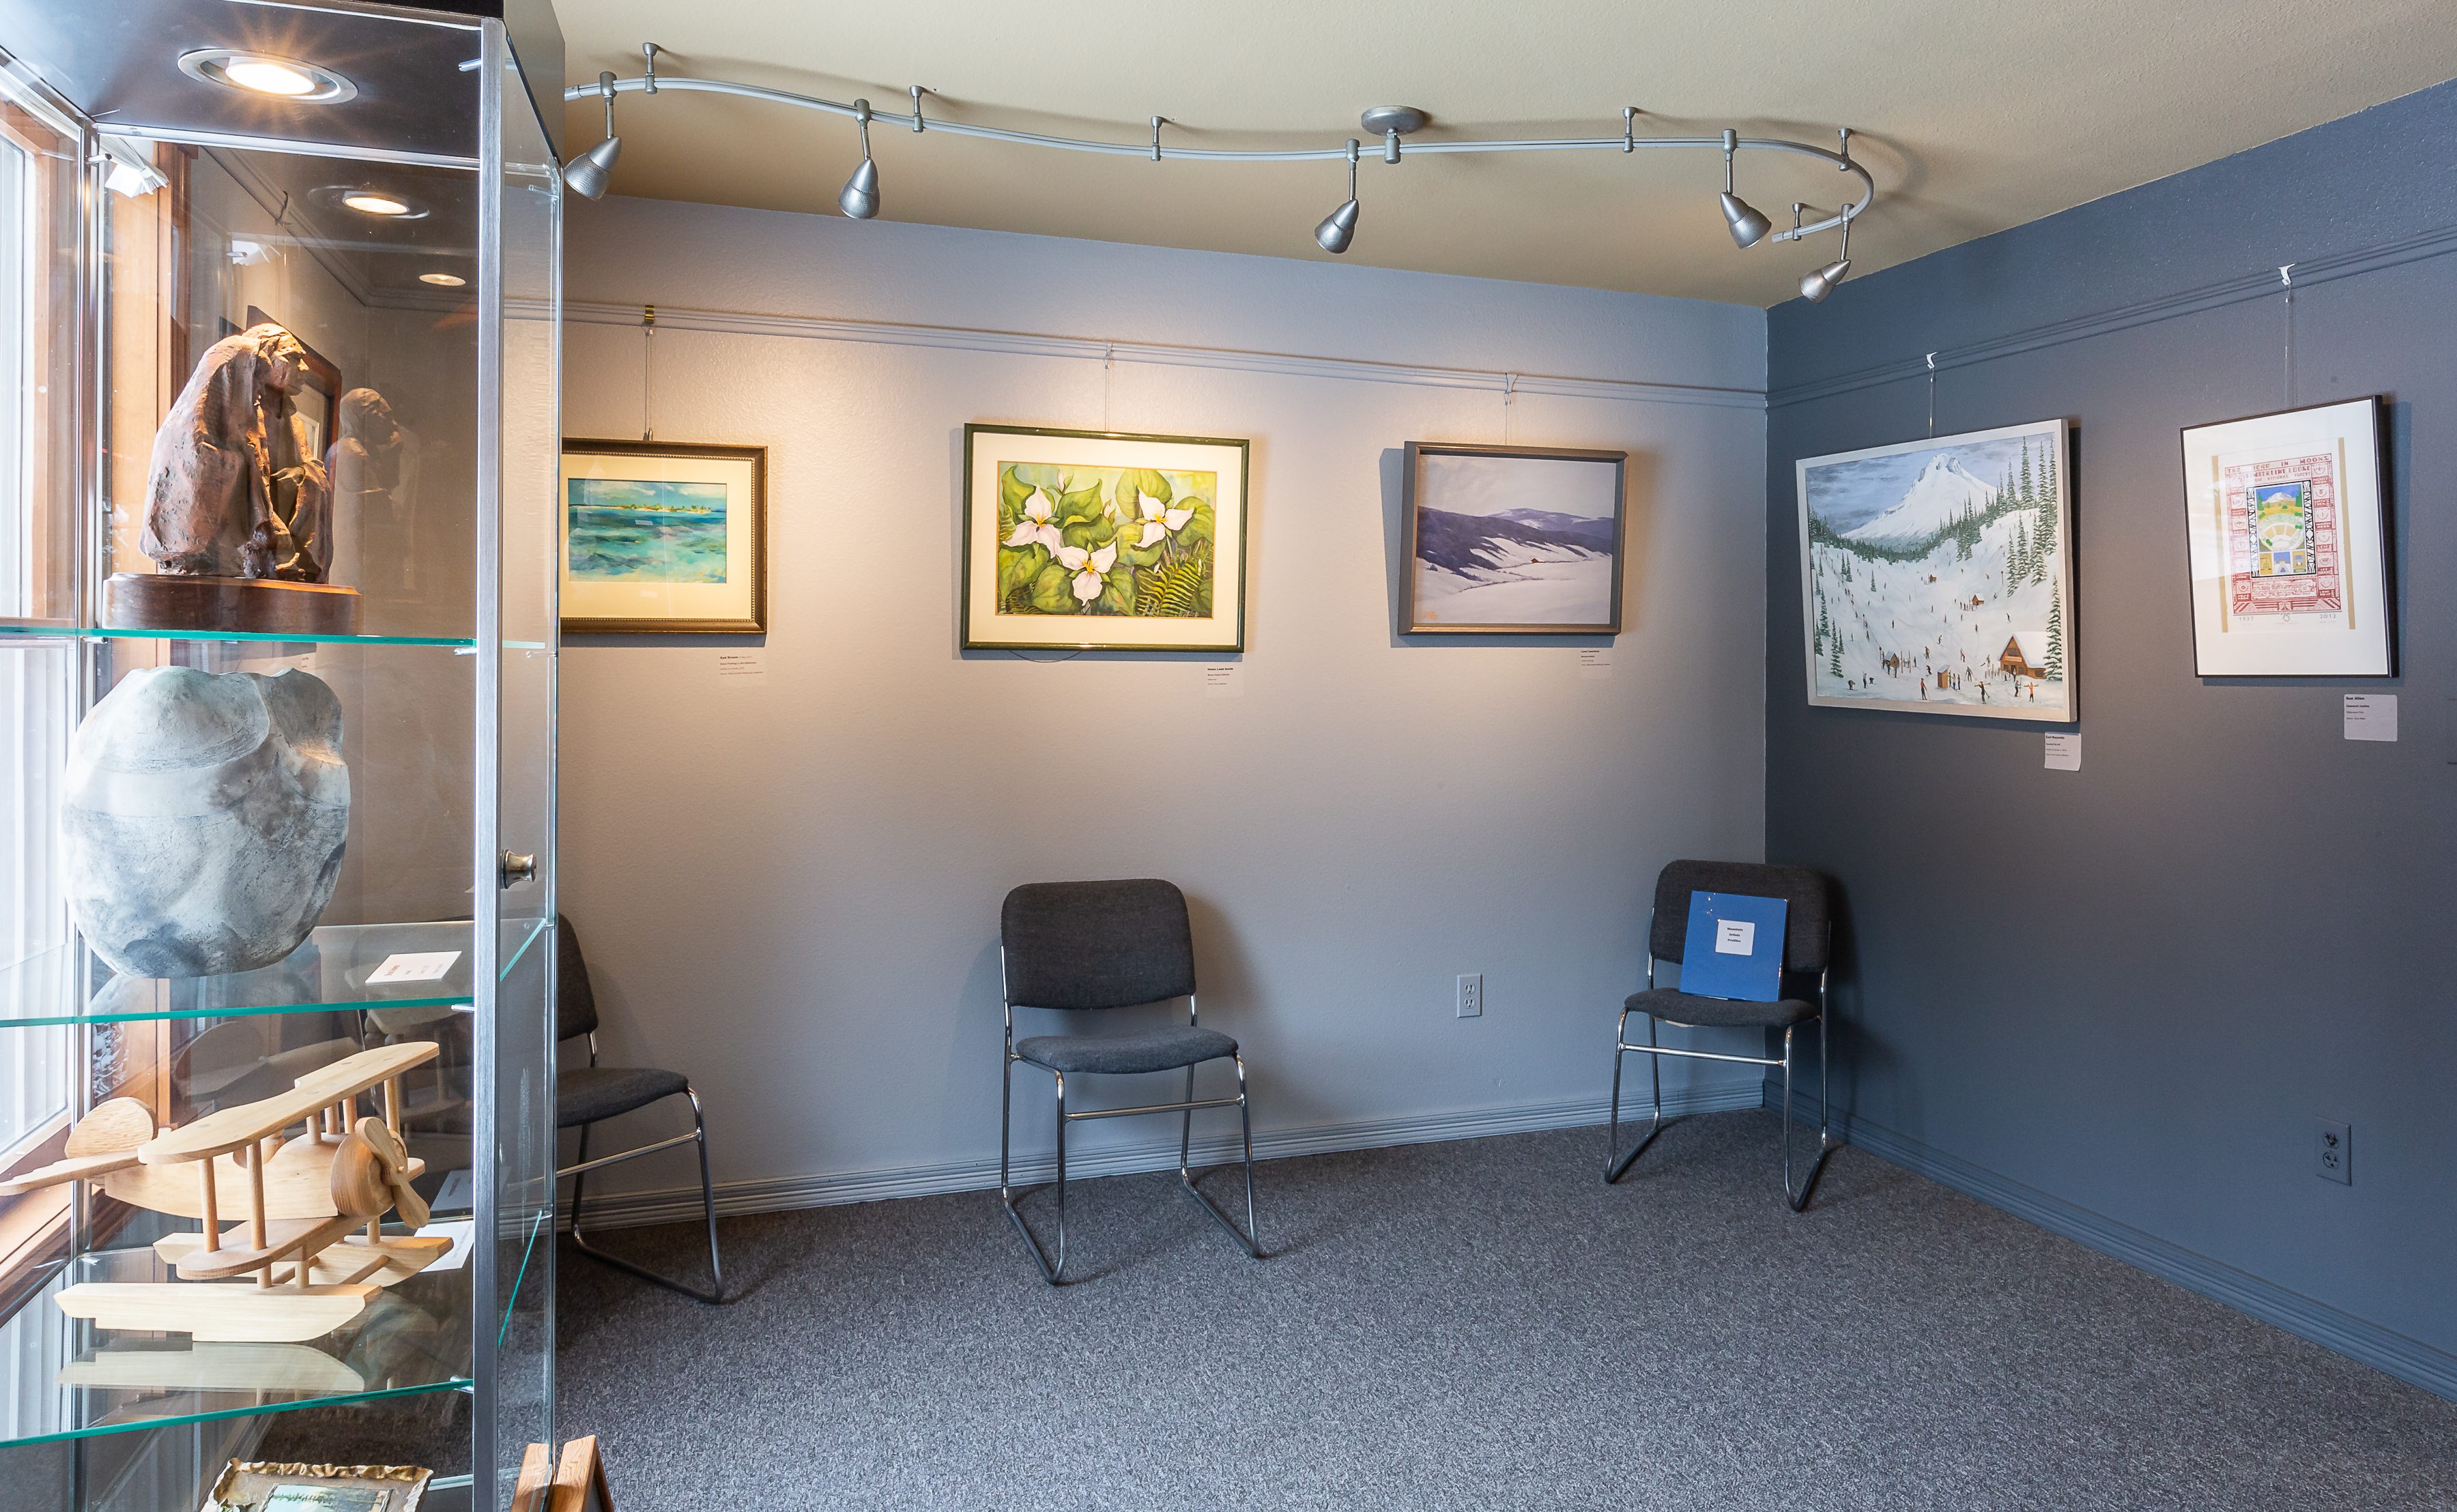 This gallery is tribute to Mount Hood area artists, past and present.
The art displayed is all from the museum’s collection and was donated by the artist or a museum patron, to inspire others to appreciate fine arts.